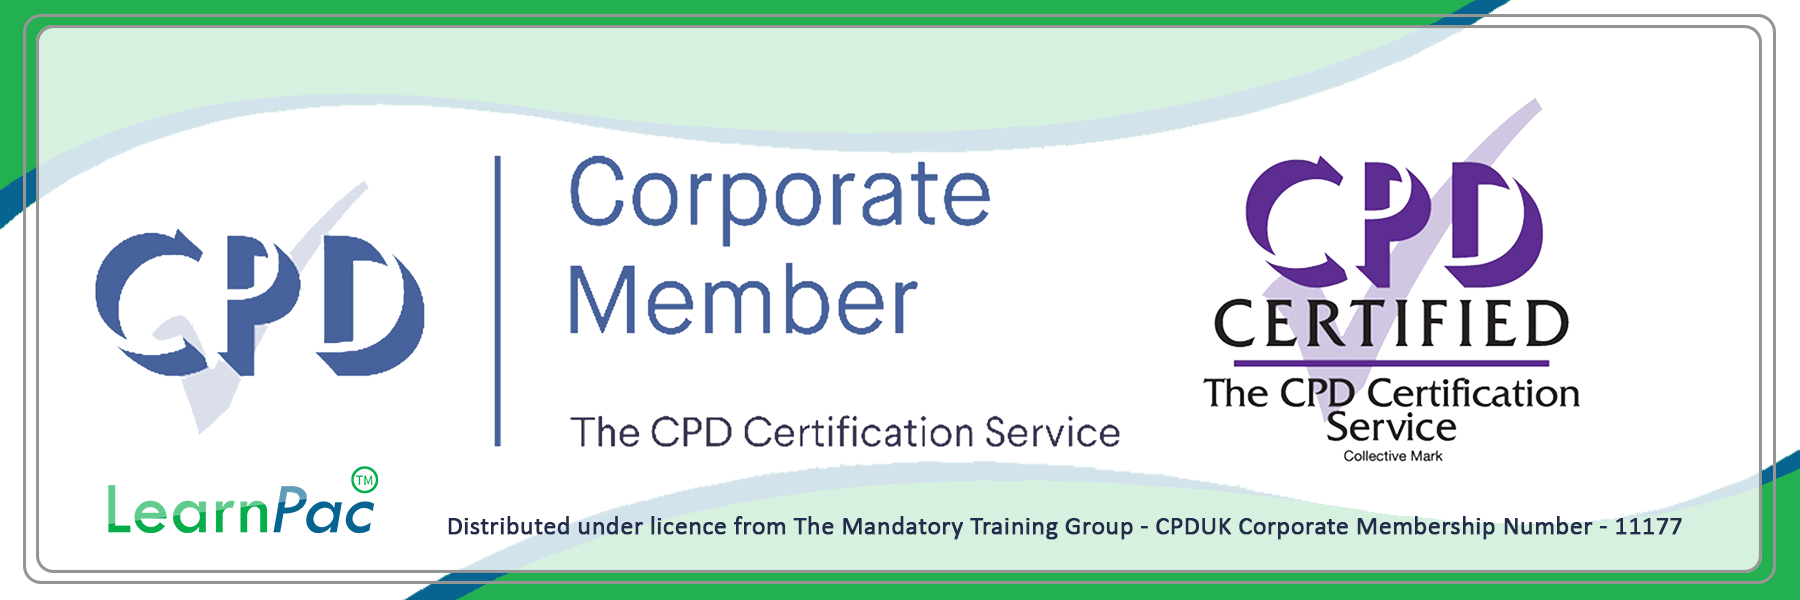 Lone Worker Training - E-Learning Courses with Certificates - CPD Certified - LearnPac Systems UK -